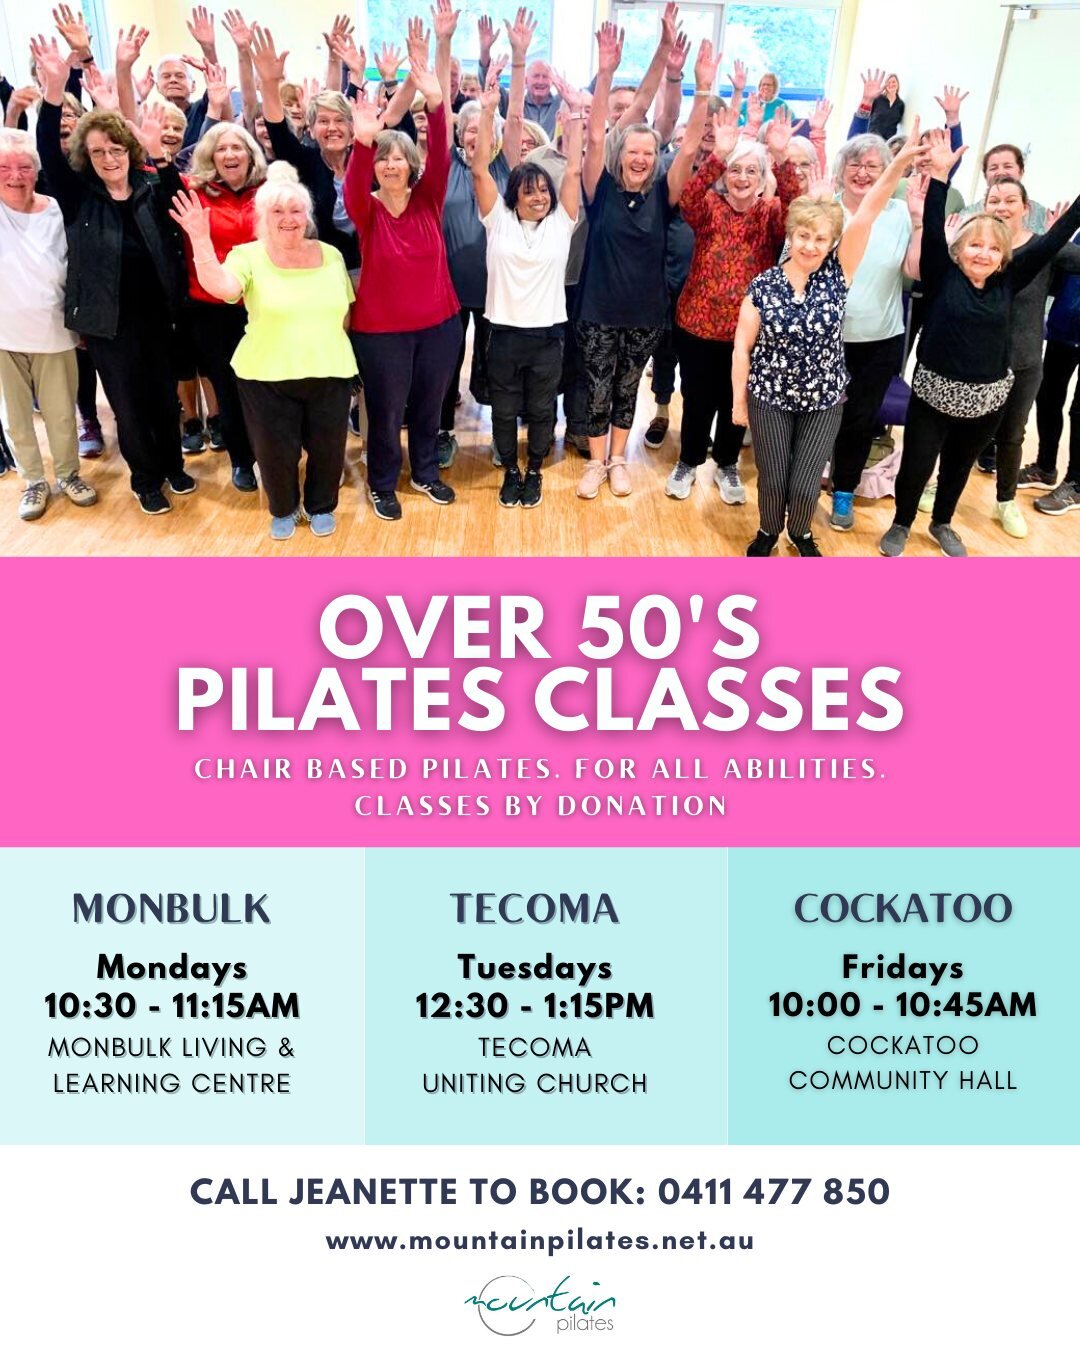 We&rsquo;ve got HUGE news....

It's official! You can now join our weekly ⭐Over 50's Chair-Based Pilates Classes⭐ in not one, not two... but 3 LOCATIONS across the Dandenong Ranges!

Monbulk, Cockatoo, and now, TECOMA TOO! 🤩🥳

Our classes are desig